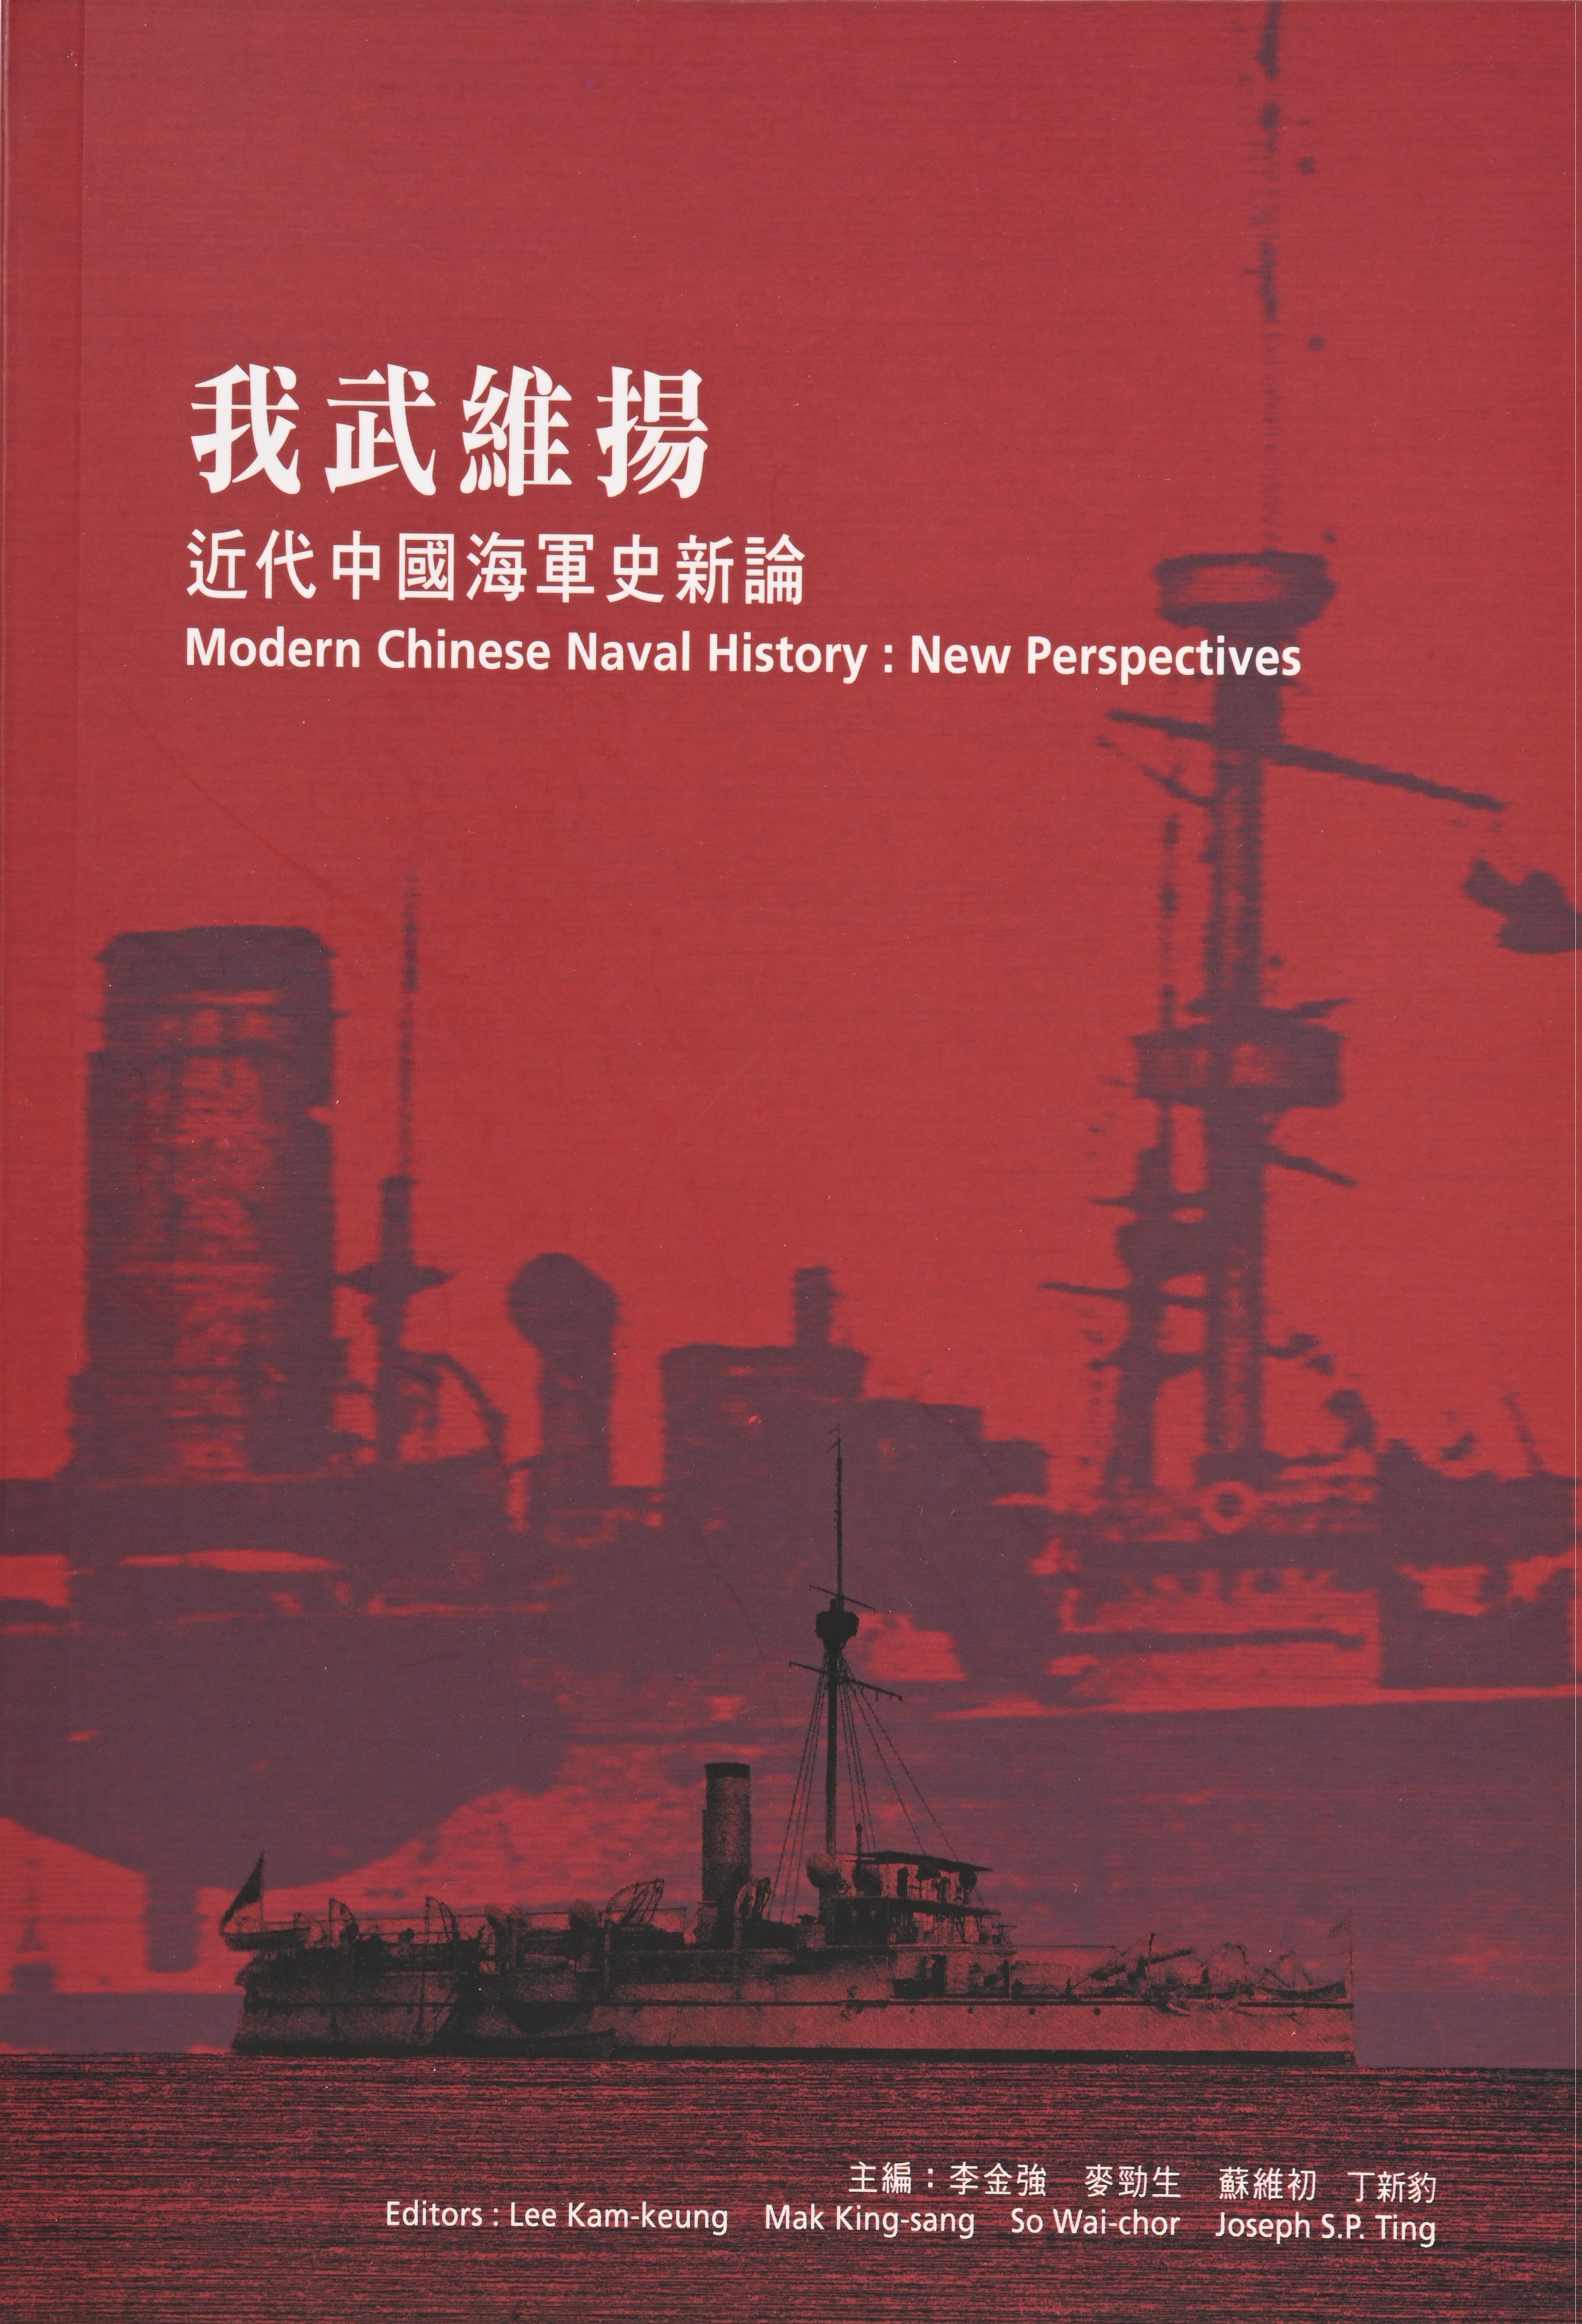 Modern Chinese Naval History: New Perspectives